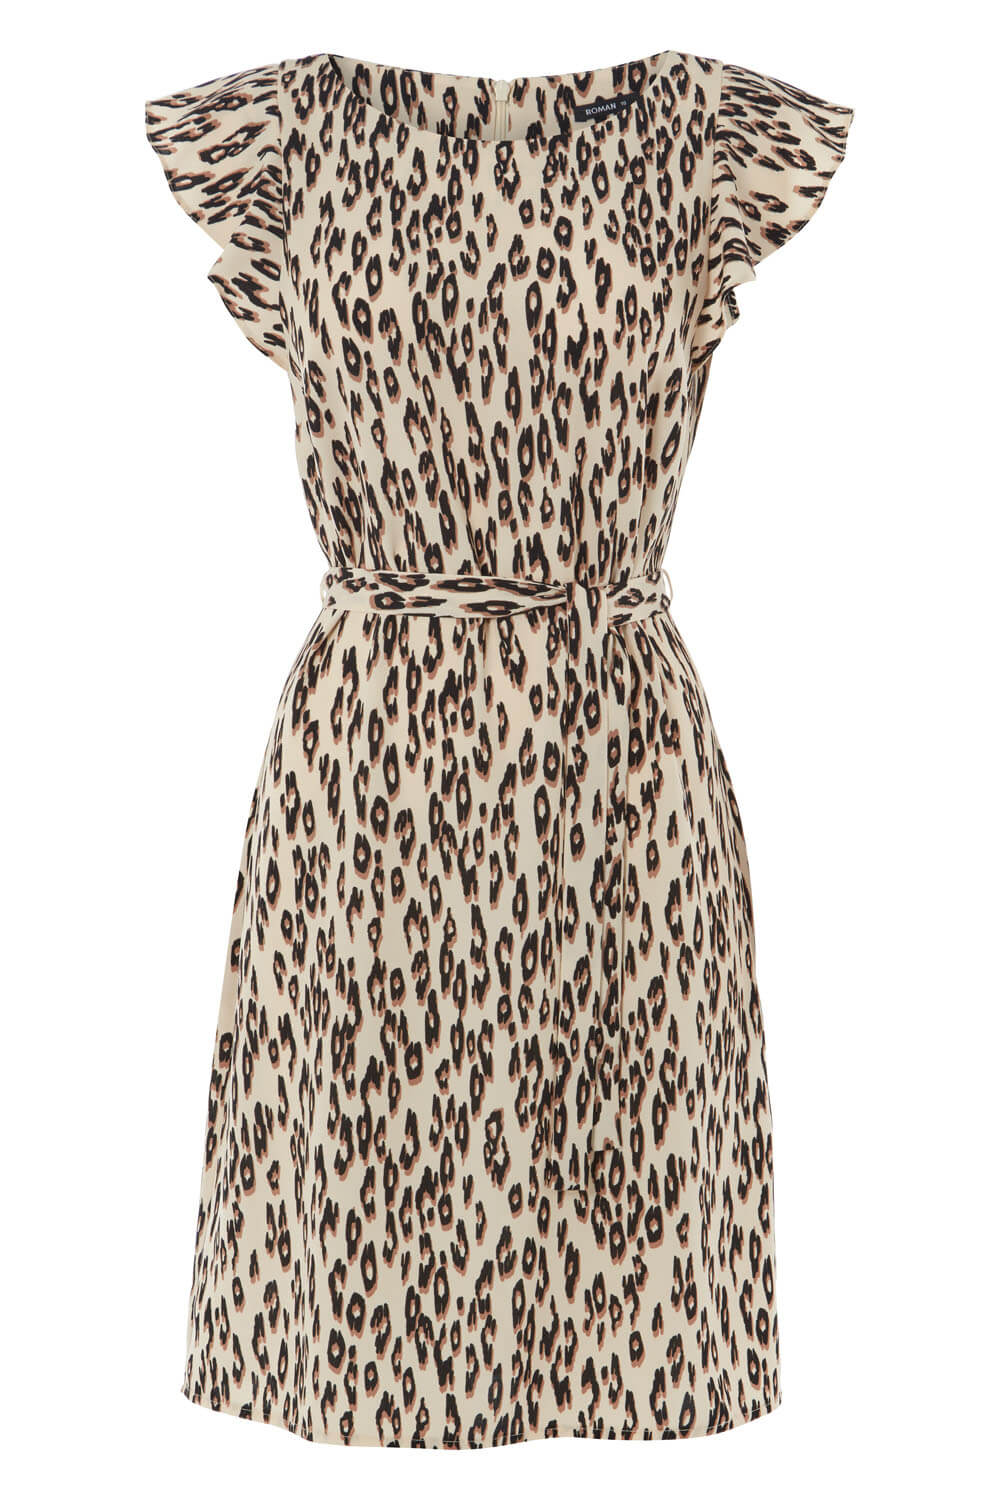 Brown Leopard Print Frill Sleeve Shift Dress, Image 5 of 5